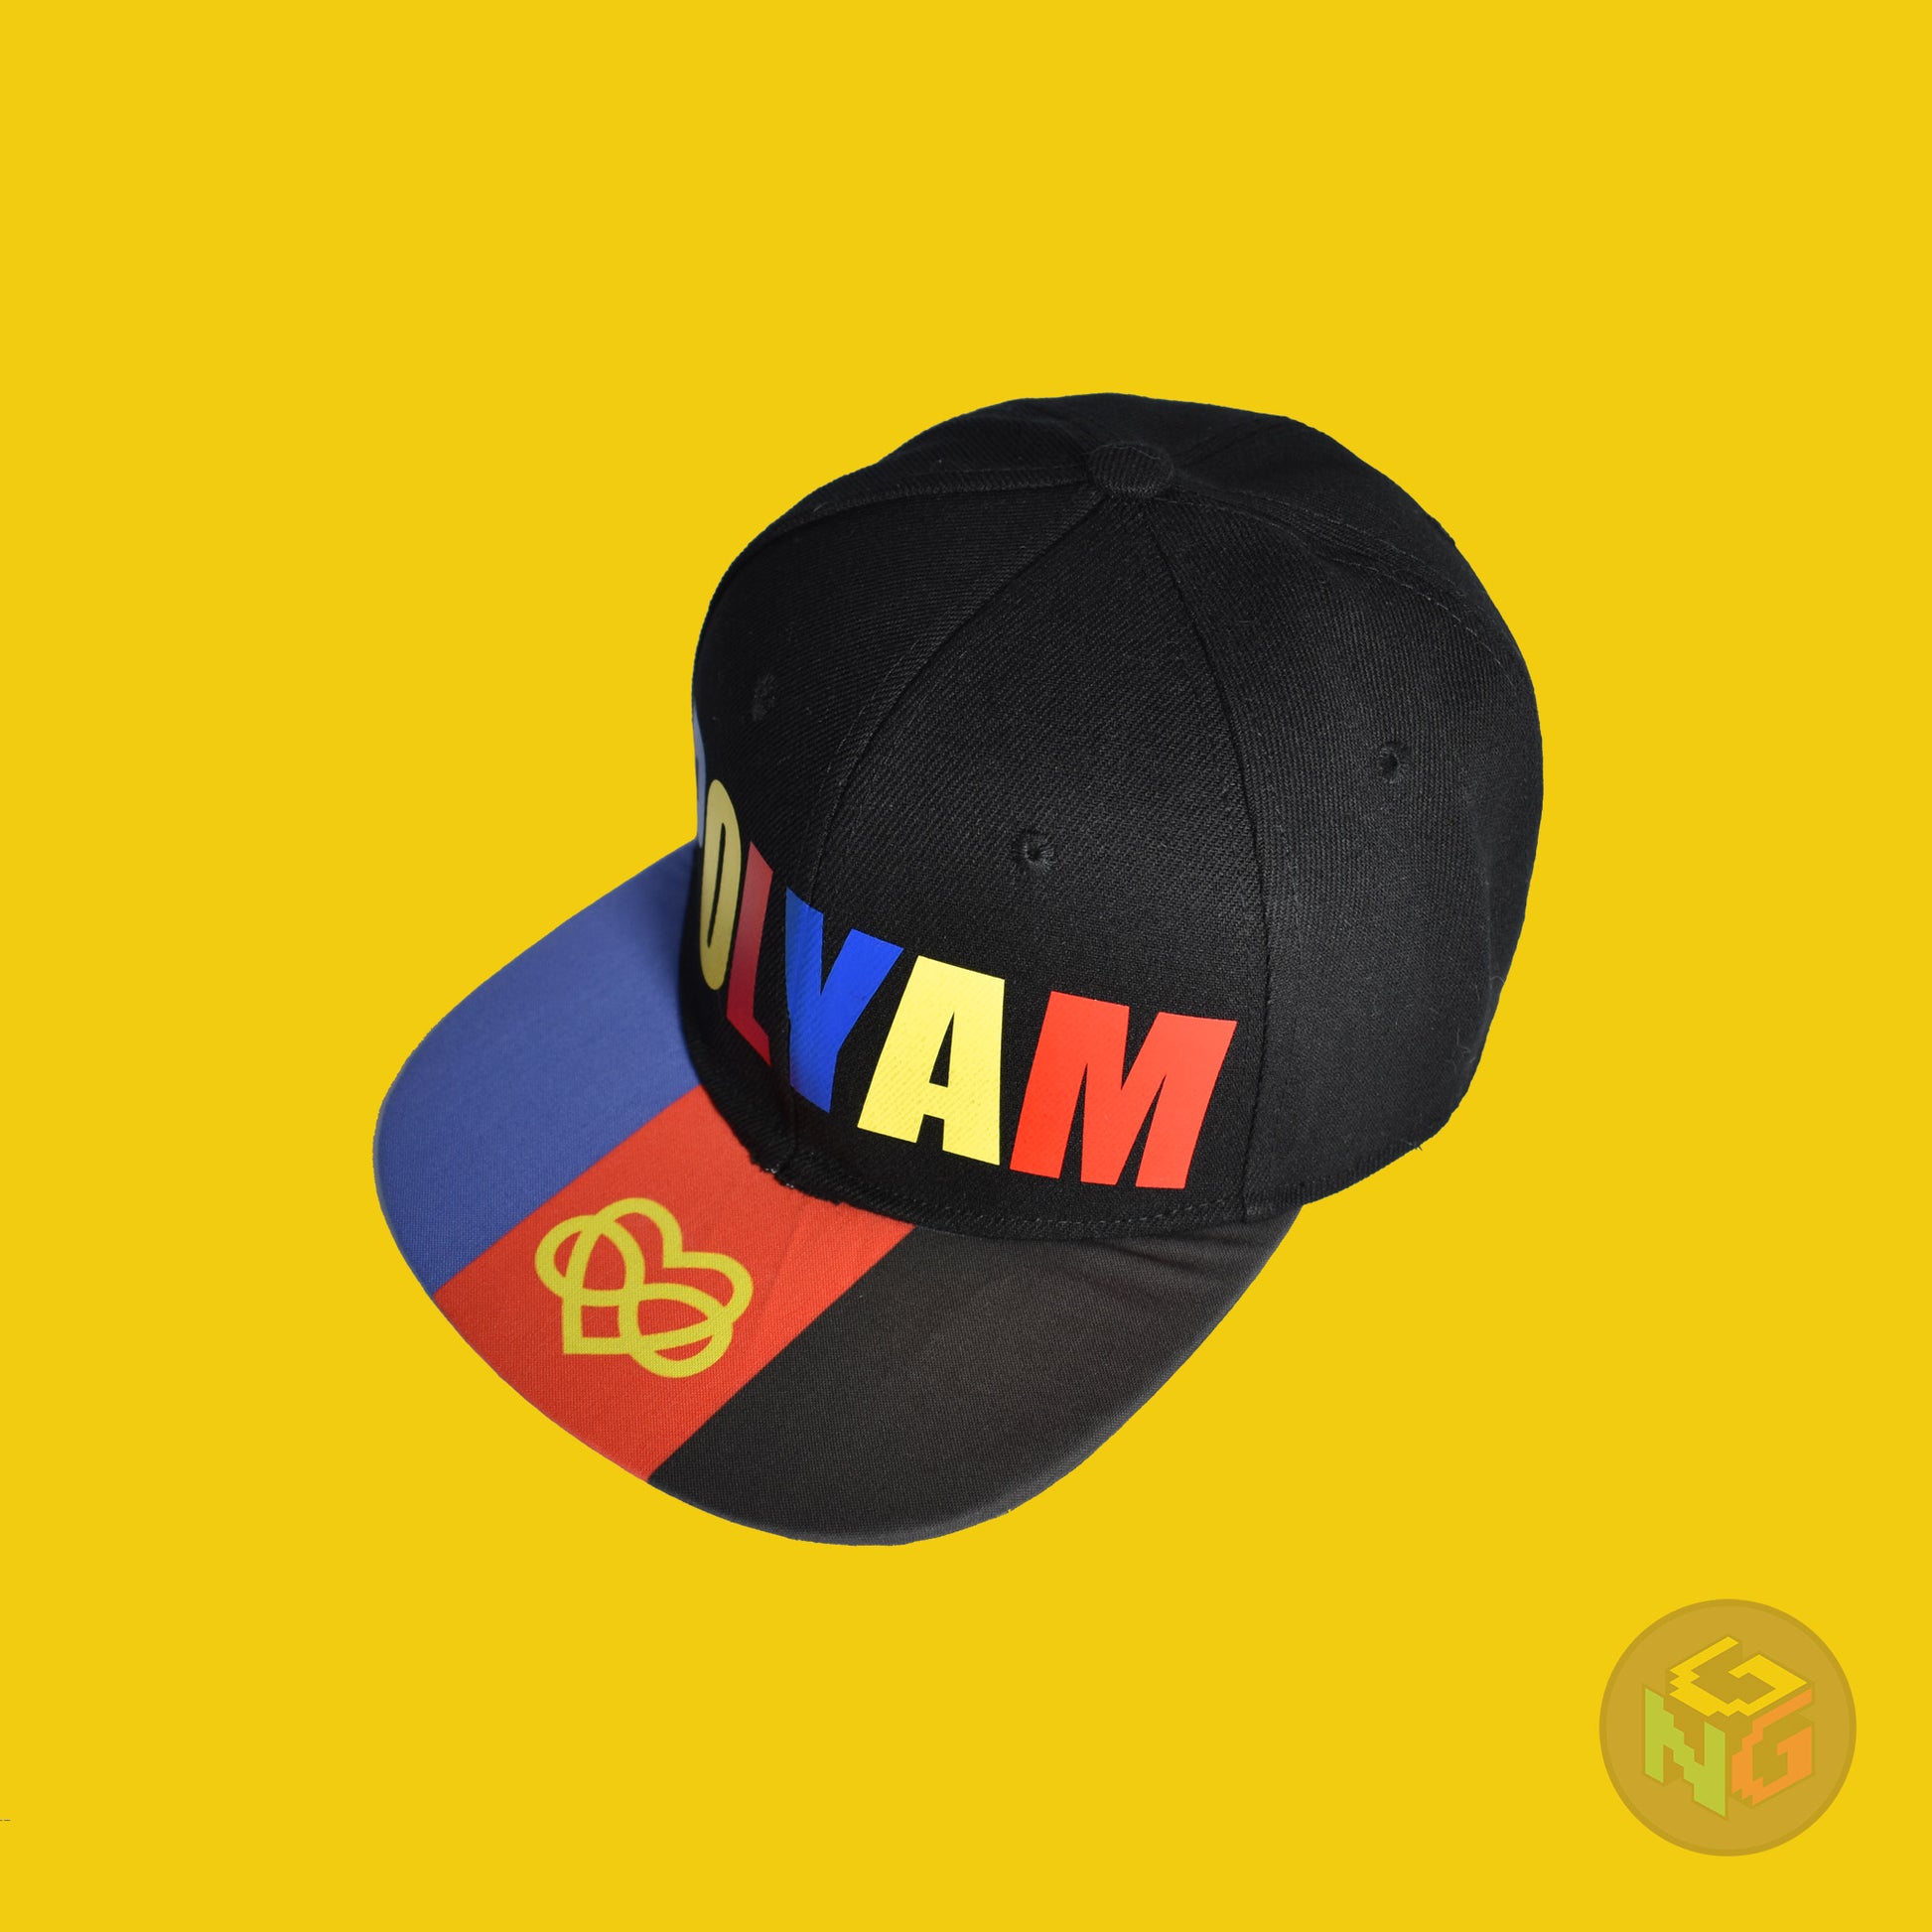 Black flat bill snapback hat. The brim has the polyamory pride flag with the heart infinity symbol on both sides and the front of the hat has the word “POLYAM” in red, yellow, and blue letters. Front left view